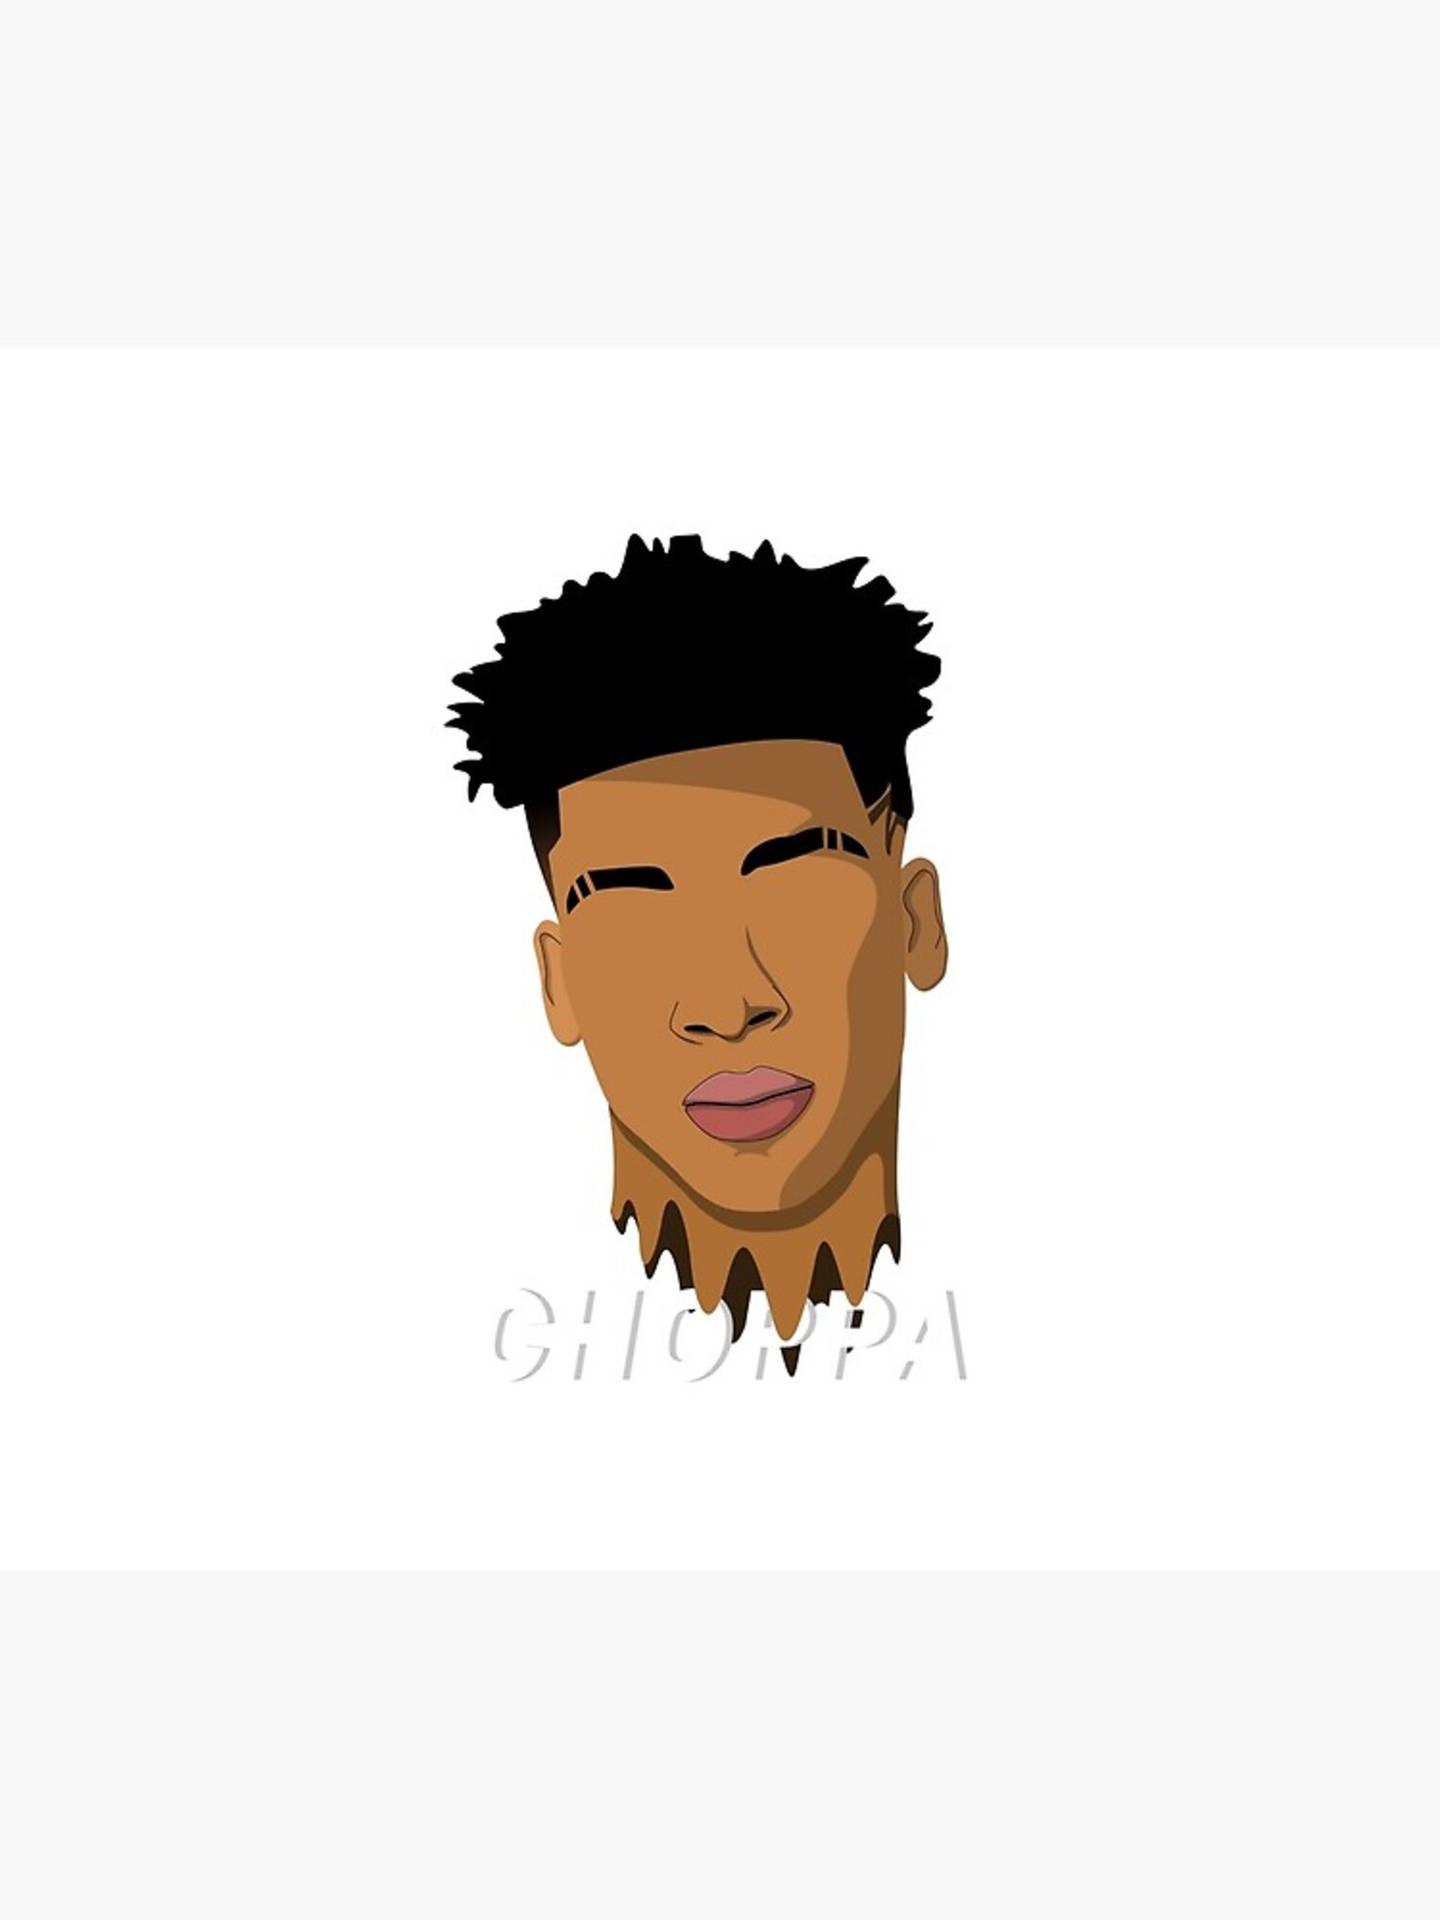 Nle Choppa 1500X2000 Wallpaper and Background Image